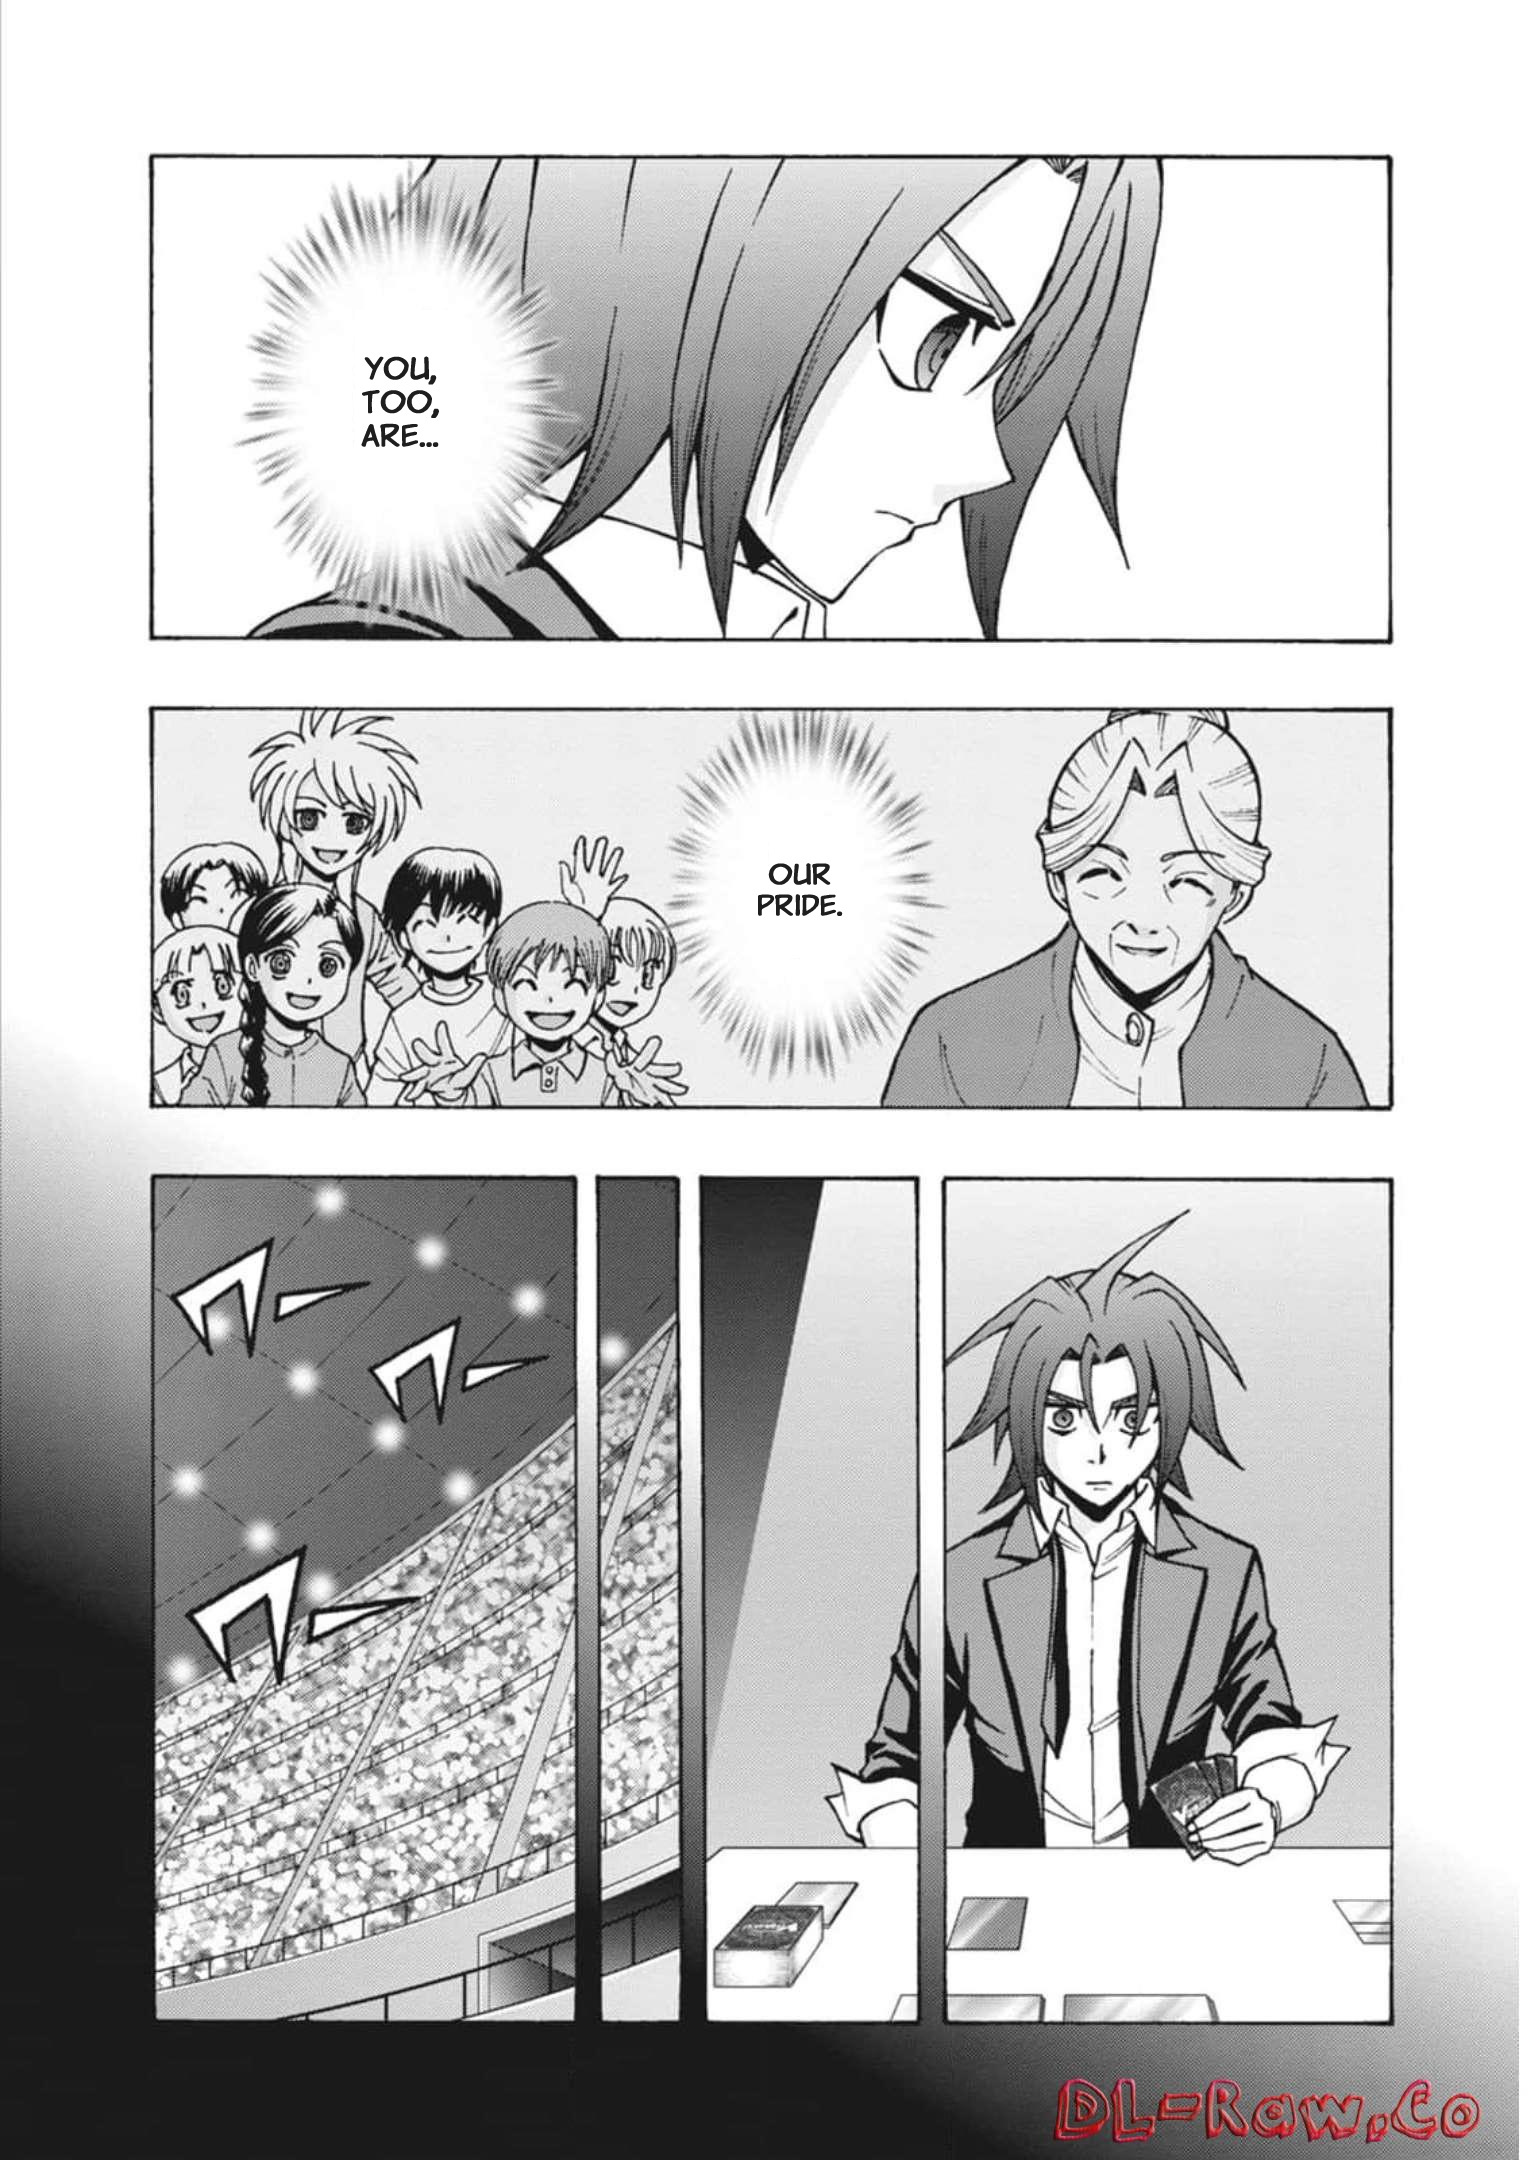 Cardfight!! Vanguard: Turnabout - Page 2